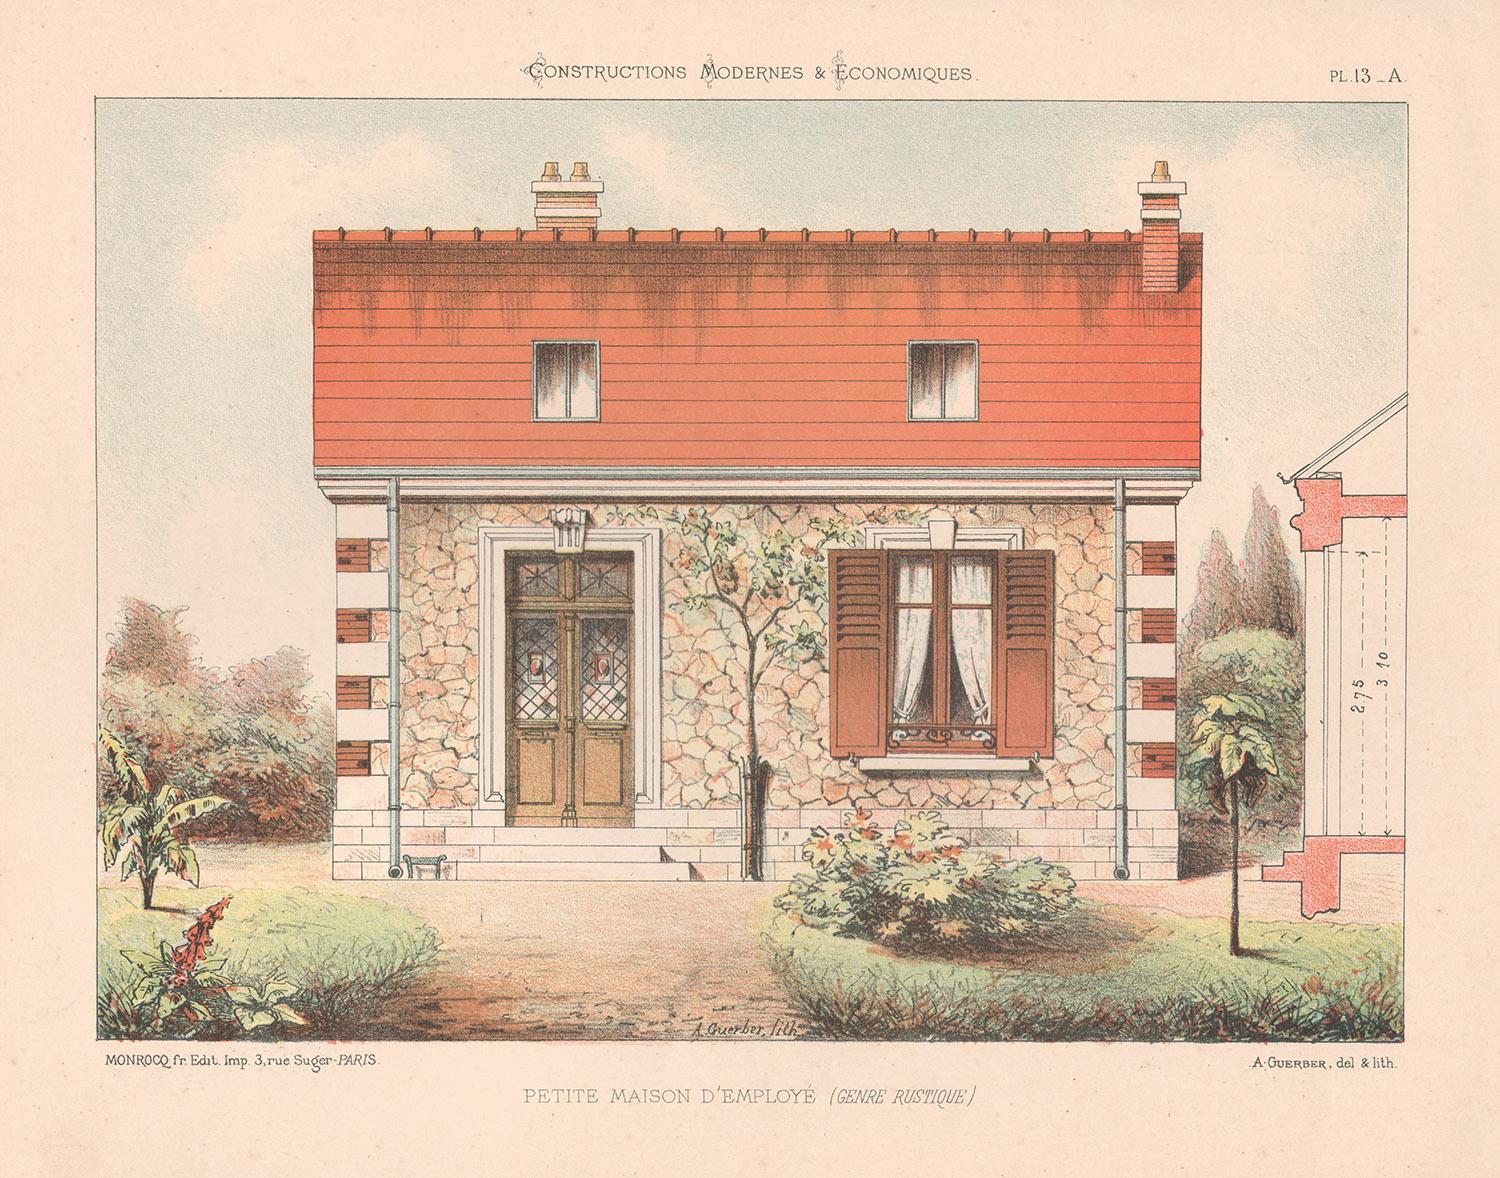 Unknown Landscape Print - French architecture house design lithograph, late 19th century, c1870